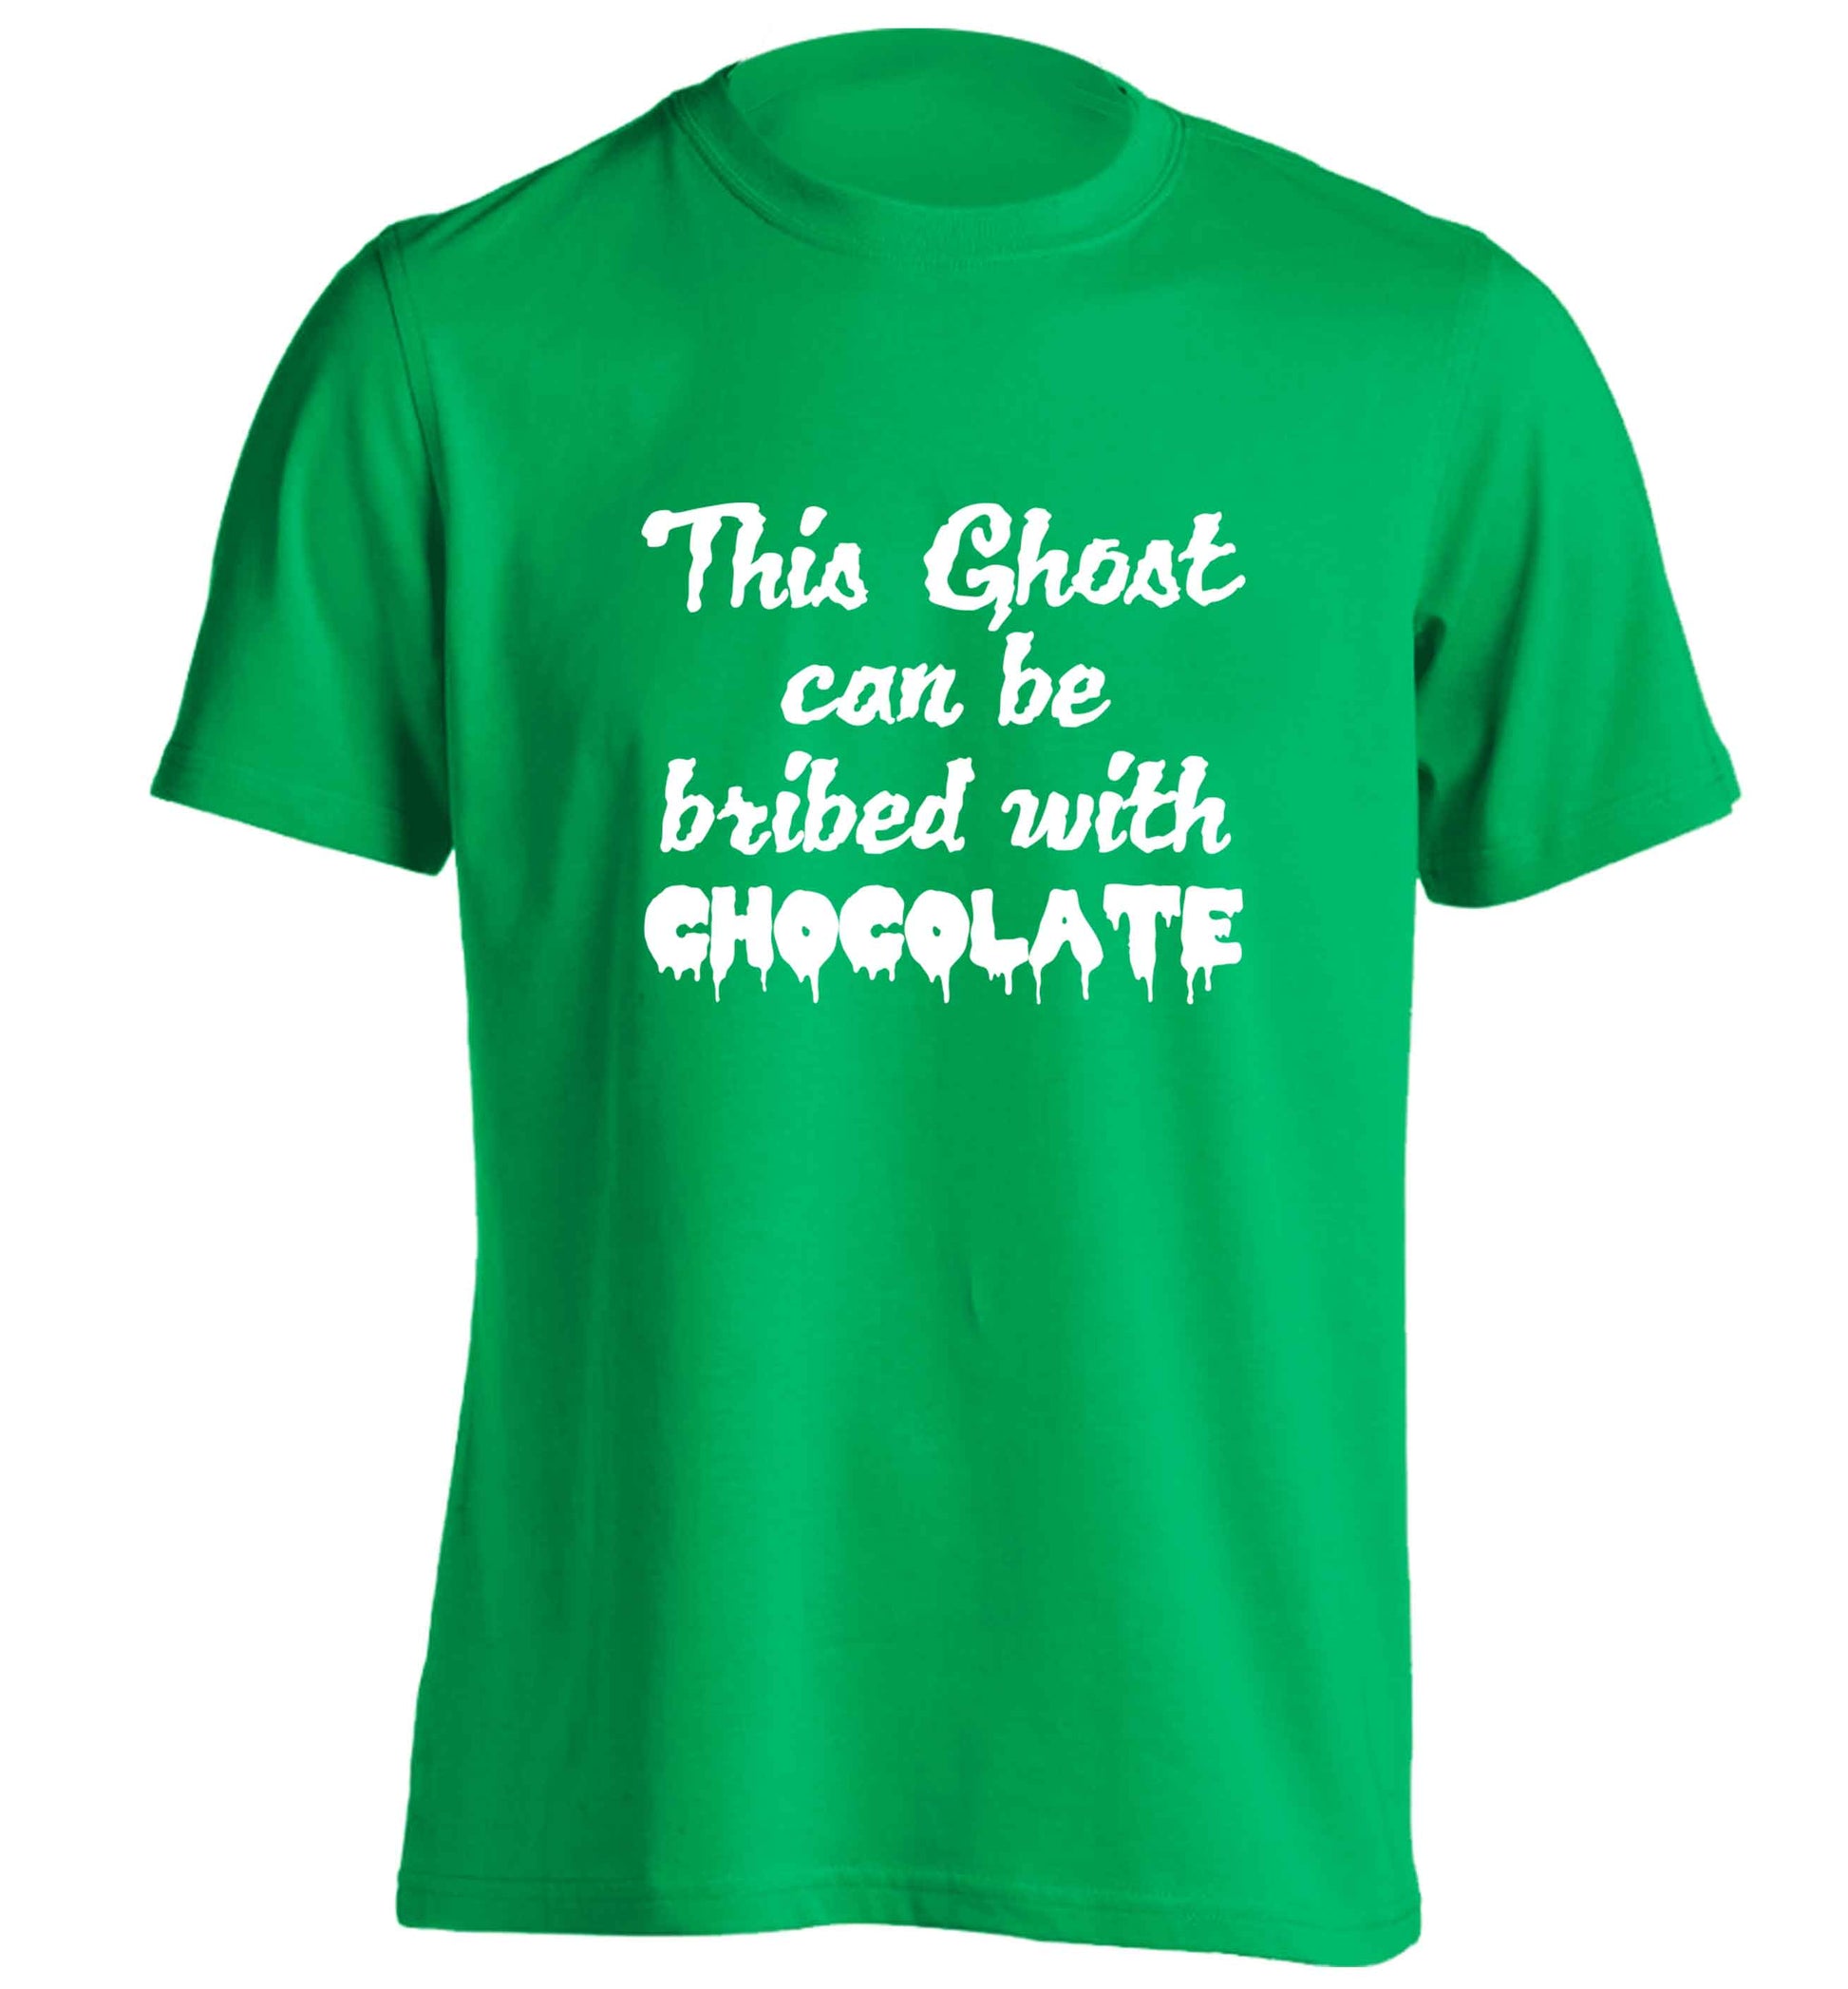 This ghost can be bribed with chocolate adults unisex green Tshirt 2XL